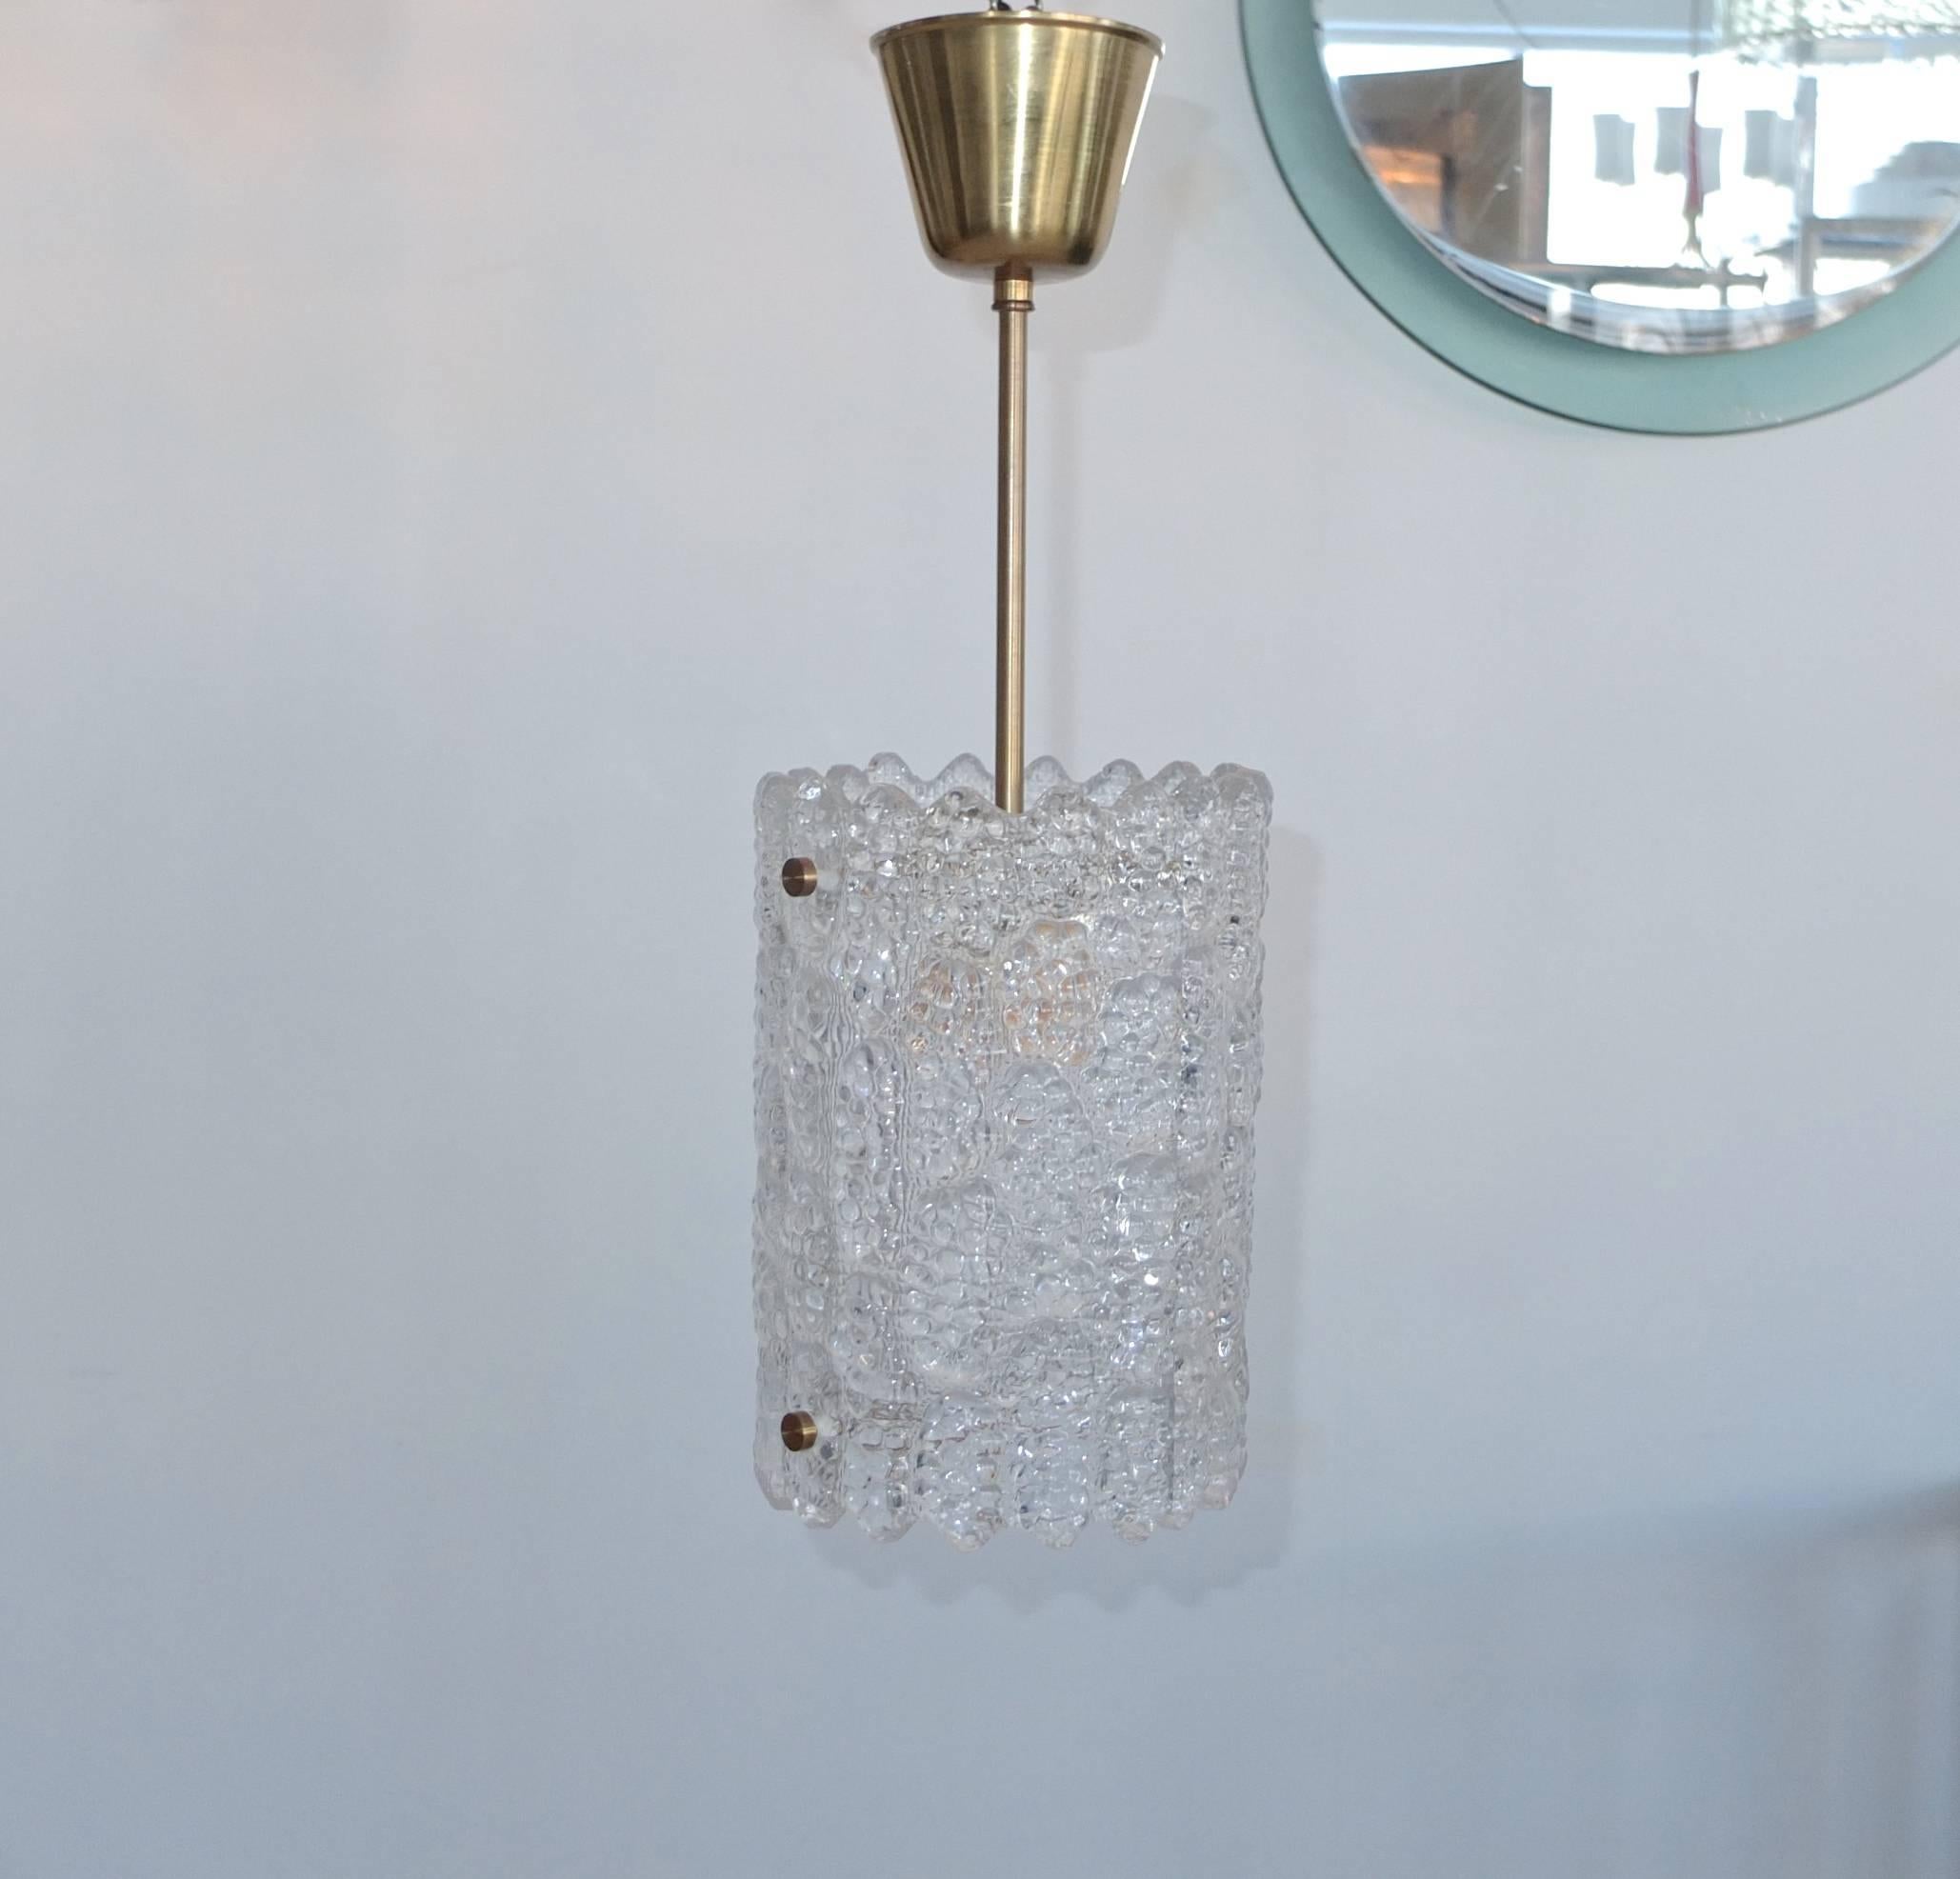 A Swedish crystal pendant light with brass hardware by Carl Fagerlund for Orrefors, Sweden. Late 1940s-early 1950s.

Total height including canopy is 20 inches. Glass only is 10 inches high by 7 inches diameter.

Takes a single standard size